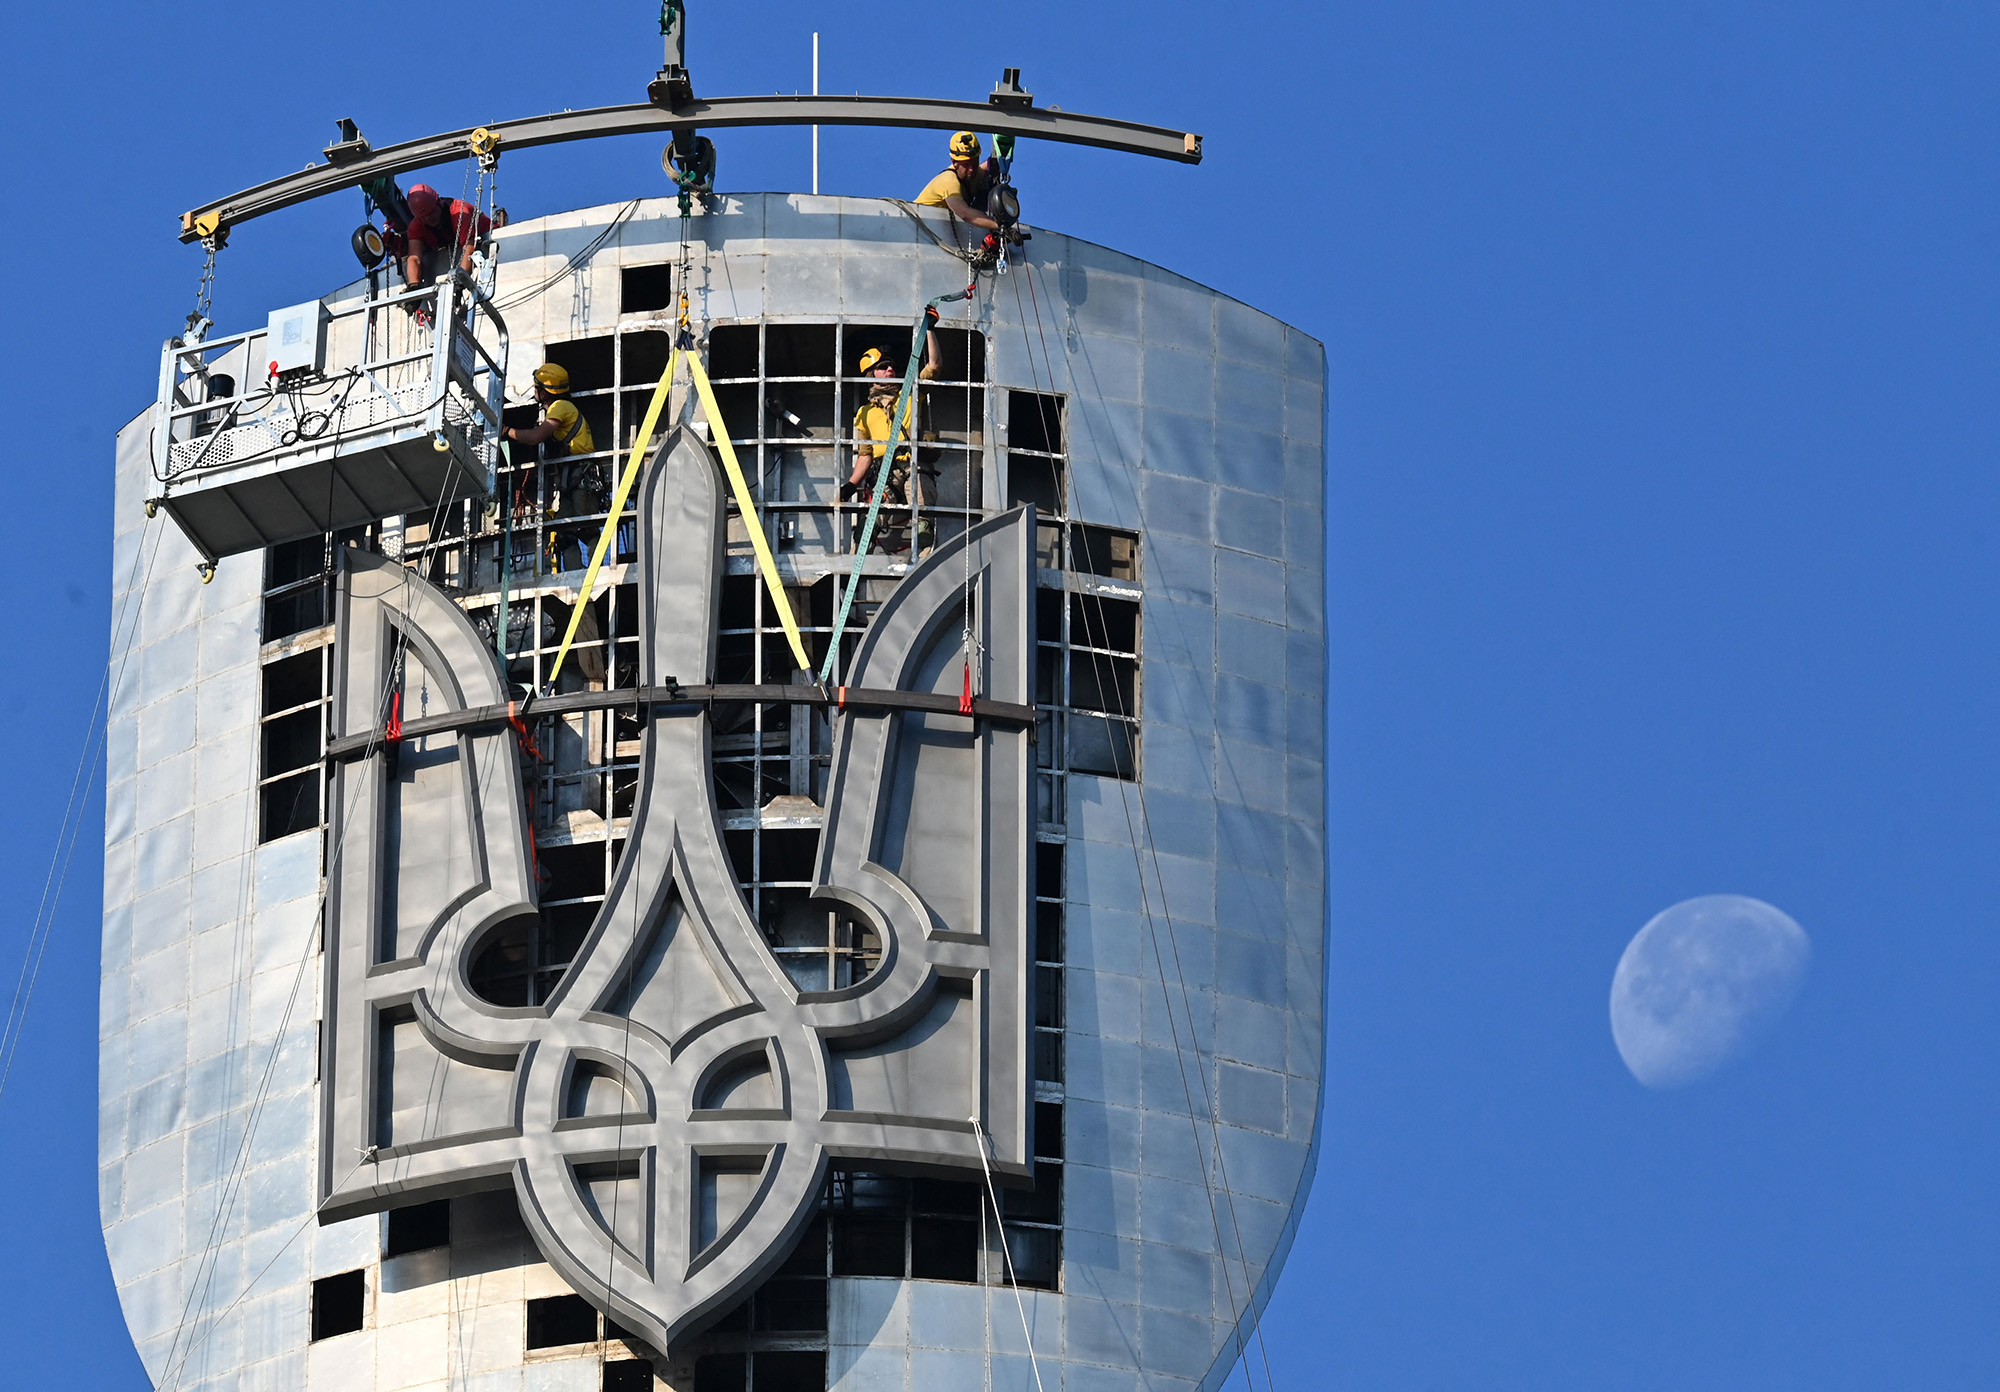 Steeplejacks operate to install the Ukrainian official coat of arms replacing the coat of arms of the former Soviet Union which was previously removed from the Motherland Monument in Kyiv, Ukraine, on August 6.